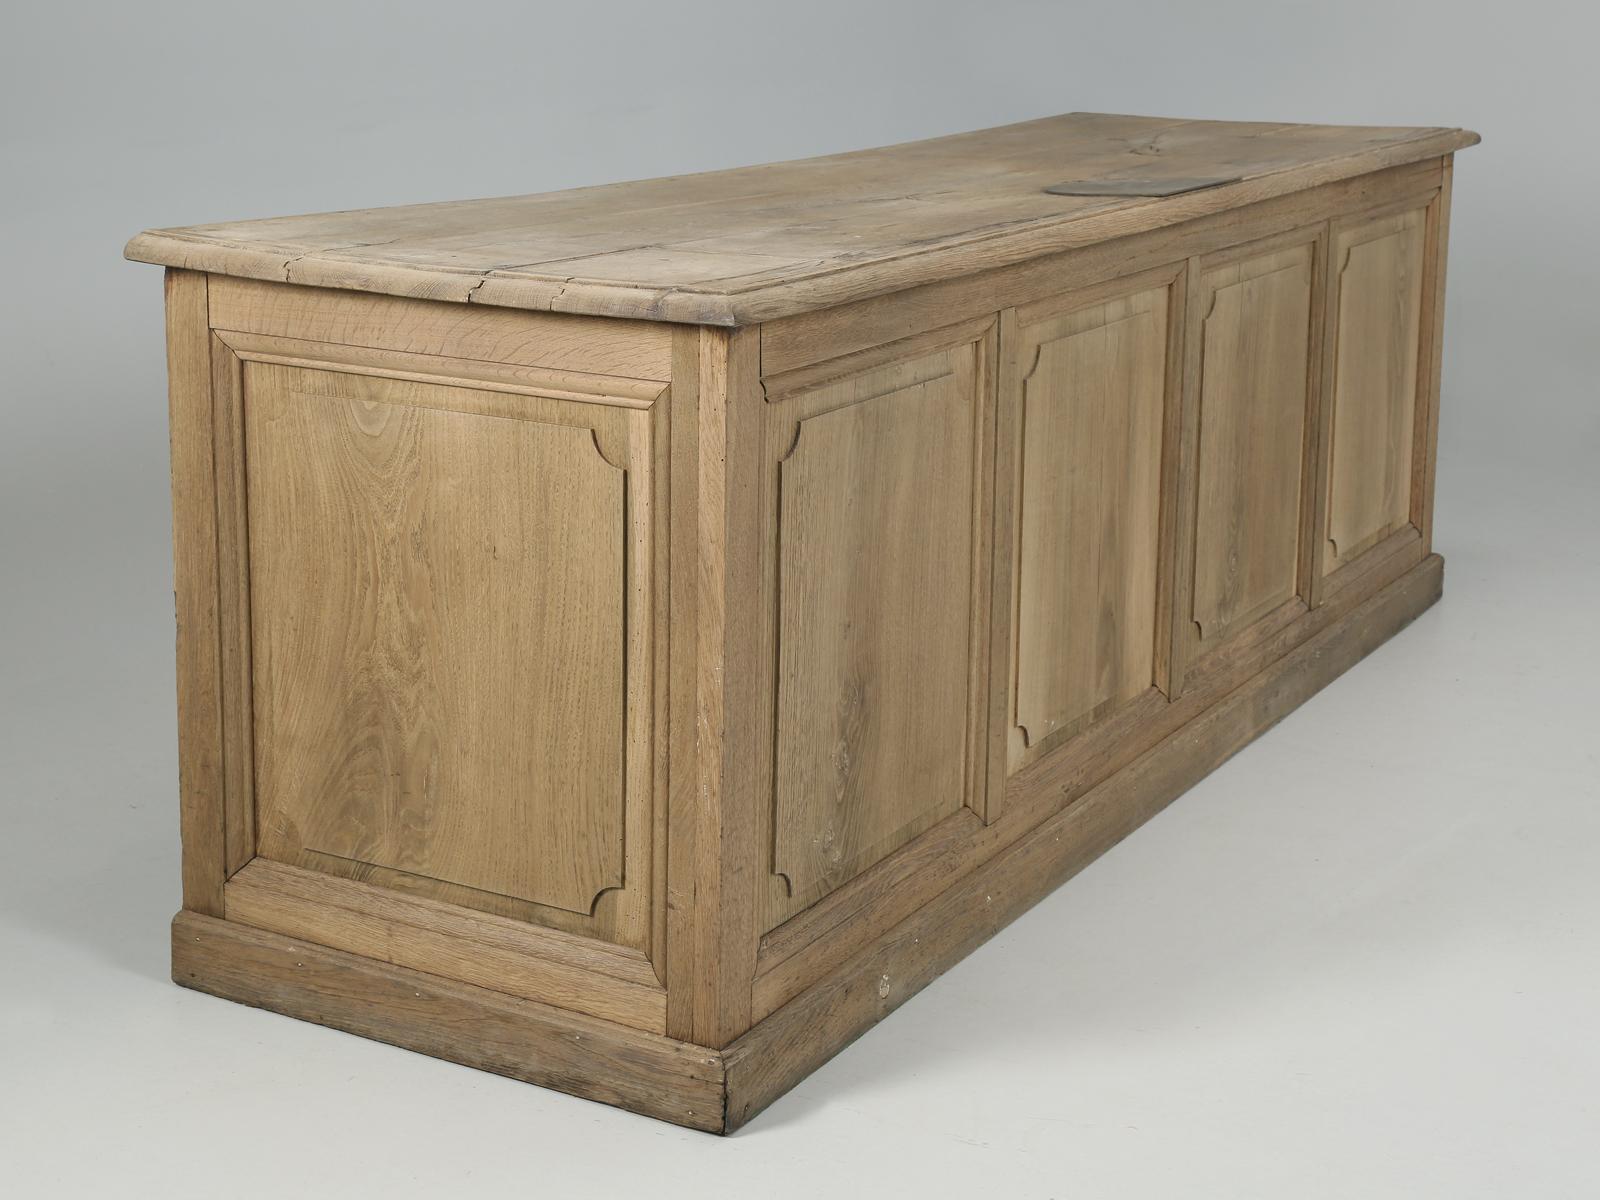 Hand-Crafted Antique Country French Kitchen Island in White Oak with it's Original Finish